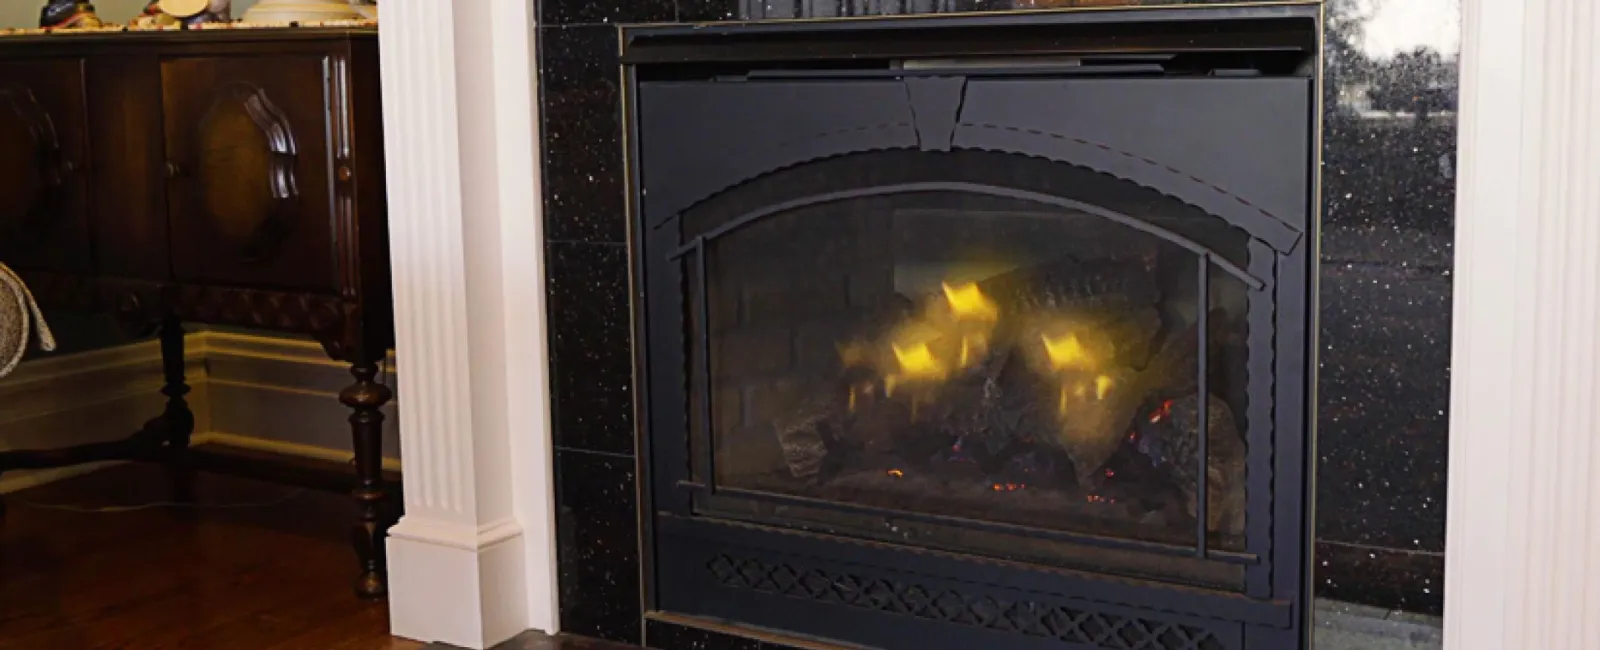 Should You Get an Electric Fireplace?